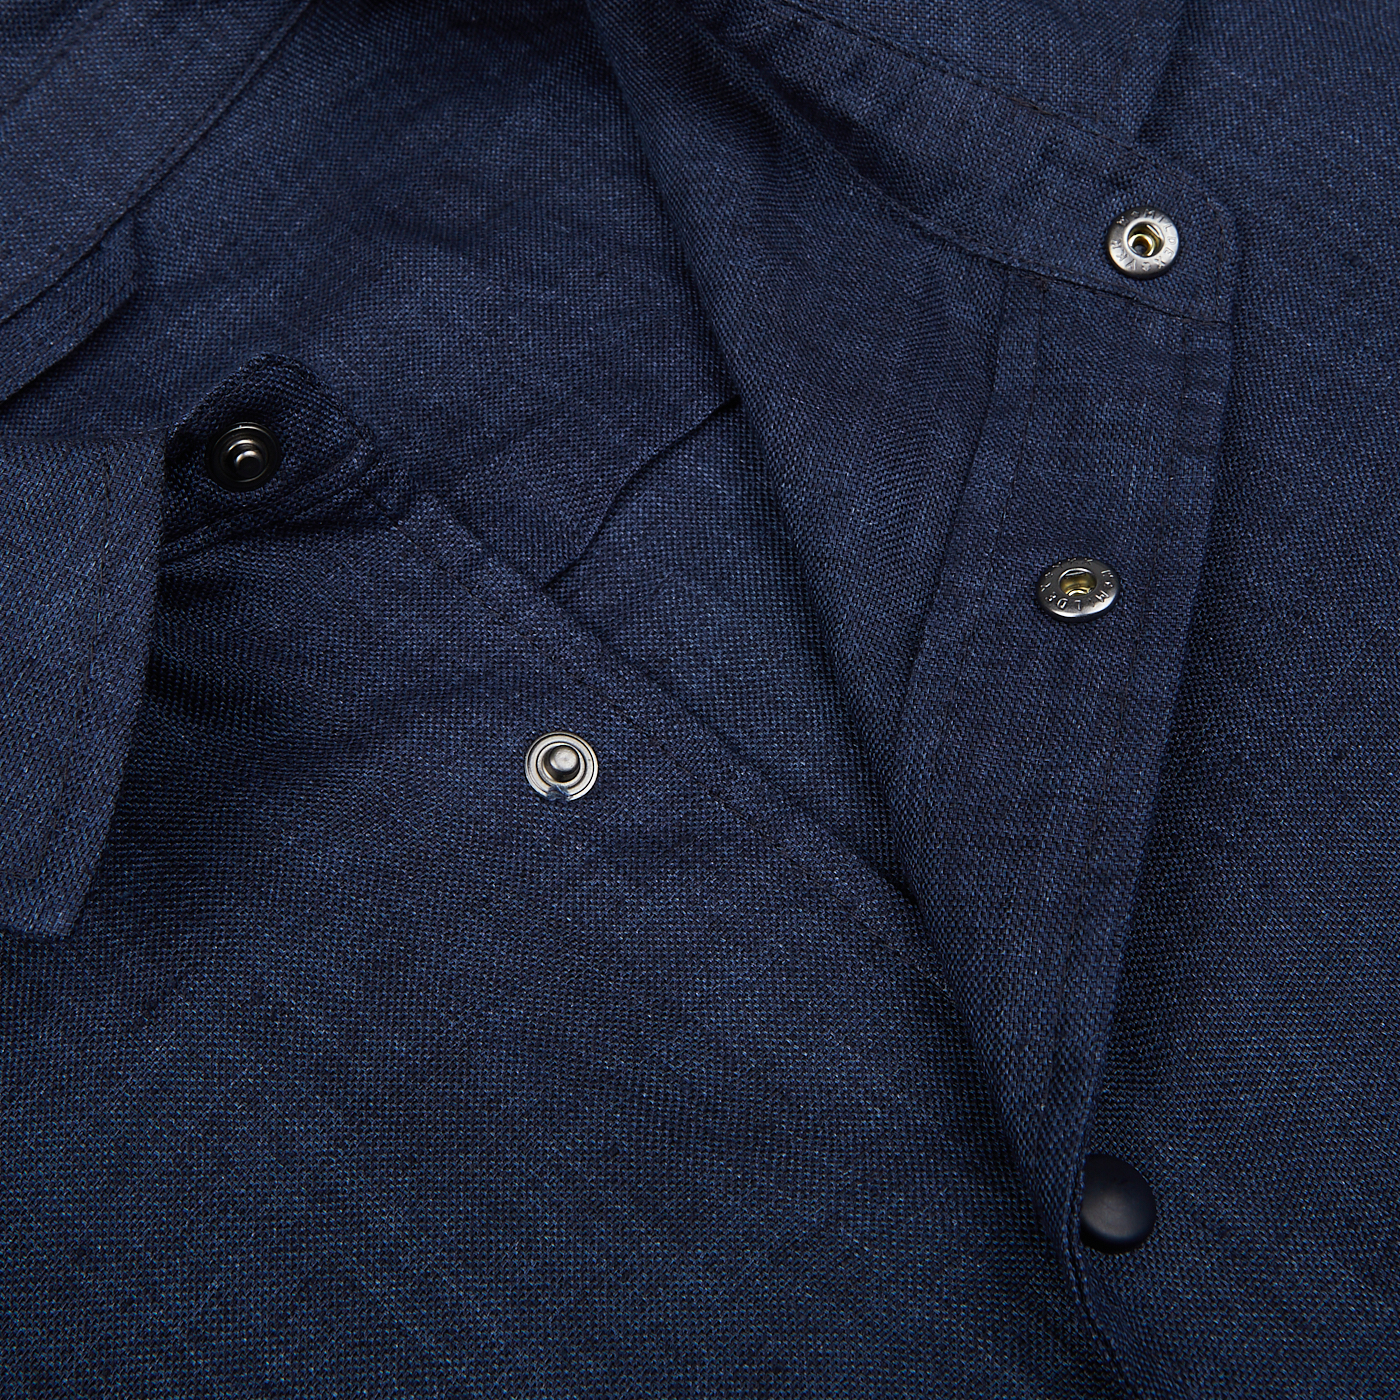 A close-up view of a Dark Blue Organic Linen Overshirt's collar and top button, made in Italy by Mazzarelli.